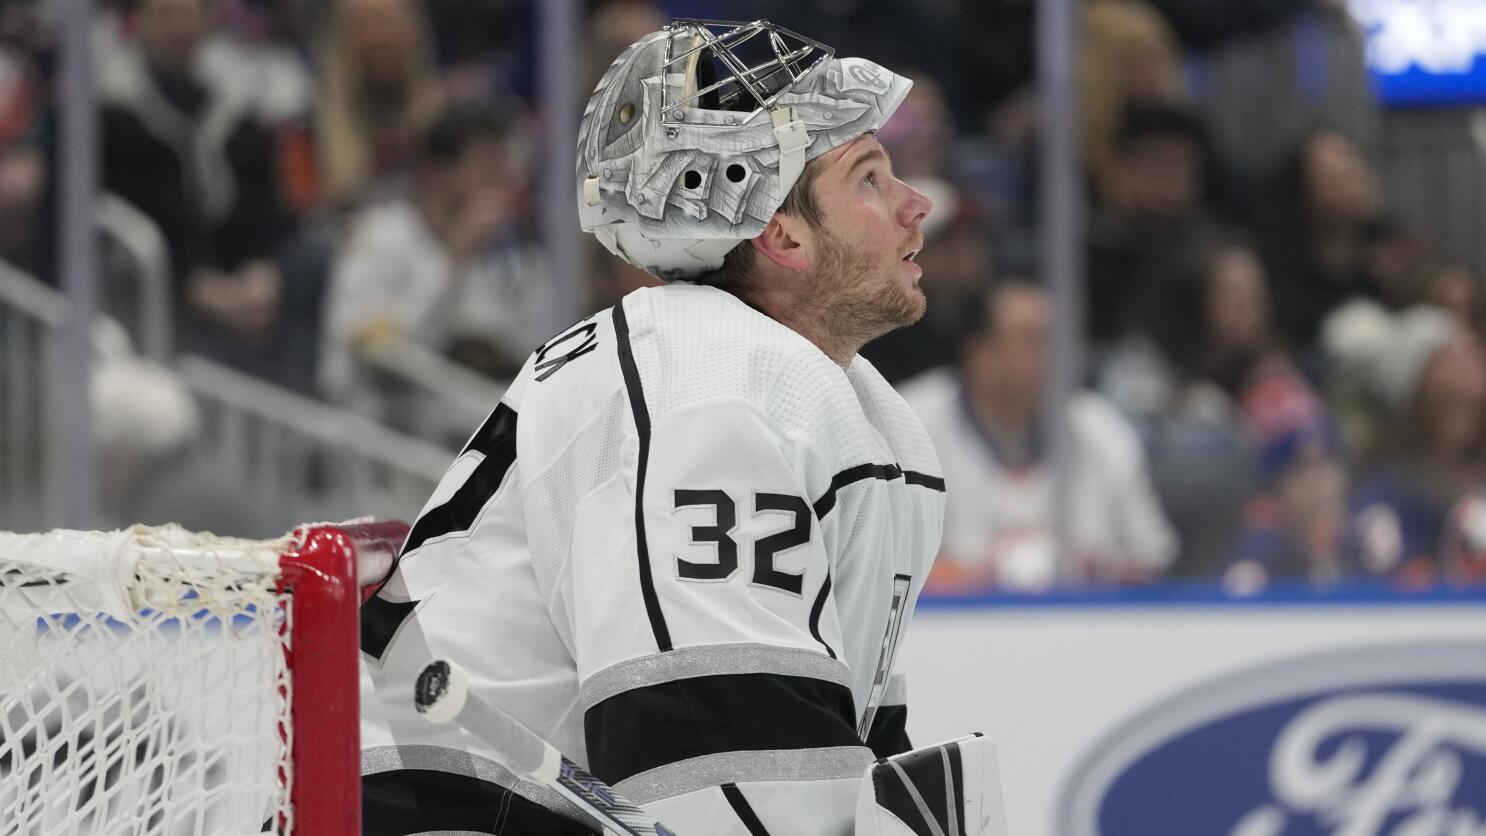 The Dodgers' Gavin Lux got some hockey lessons from the LA Kings